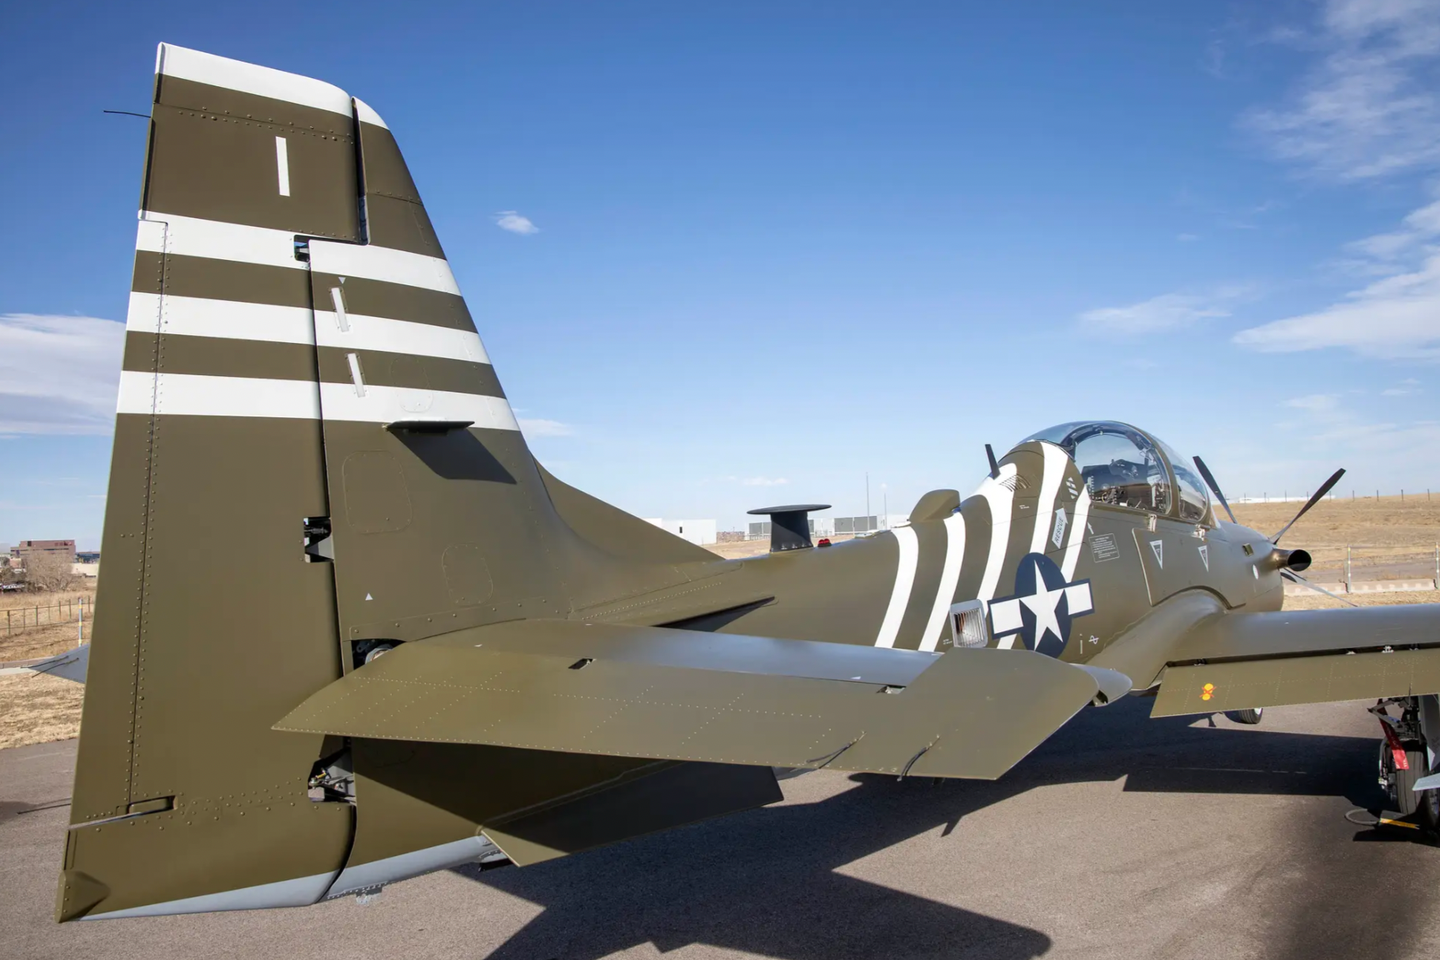 The second A-29 Super Tucano for Air Force Special Operations Command, which received this one-off heritage scheme honoring the 1st Air Commando Group of World War II.&nbsp;<em>Sierra Nevada Corporation</em>